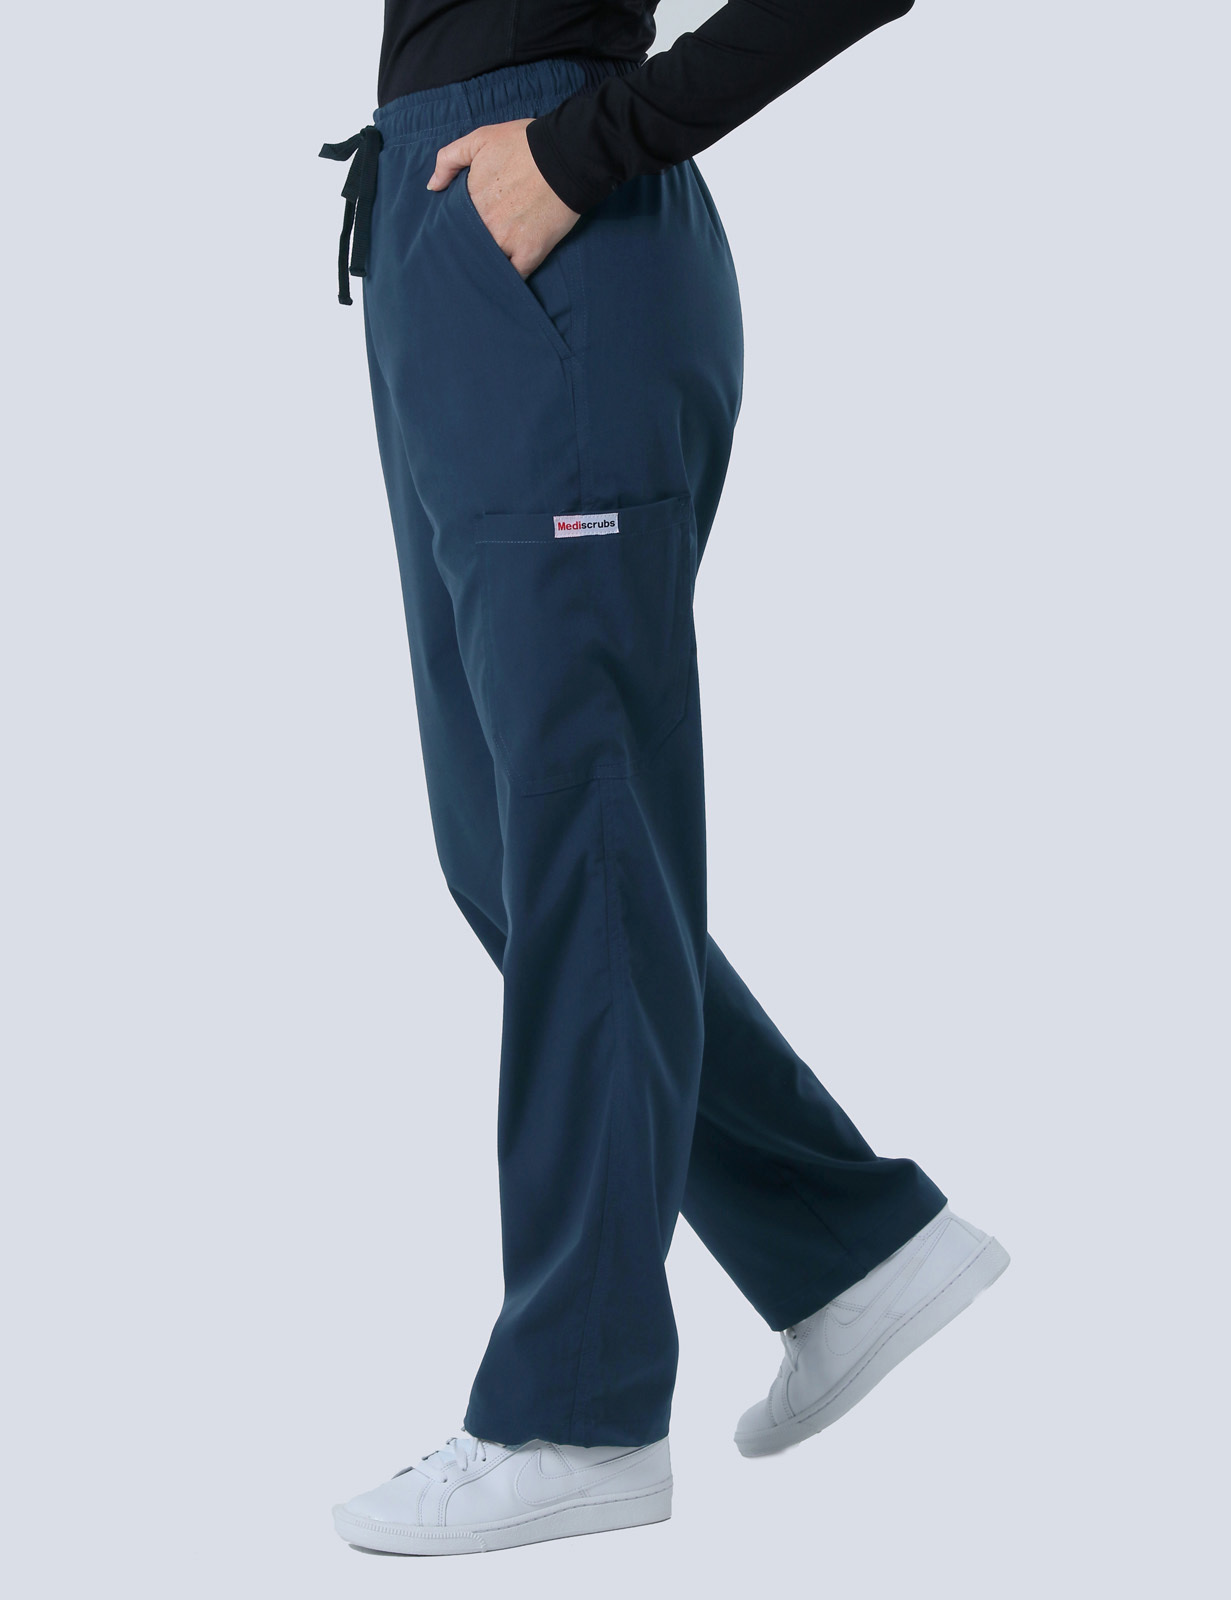 Weipa Hospital - ED EEN (Women's Fit Solid Scrub Top and Cargo Pants in Navy incl Logos)